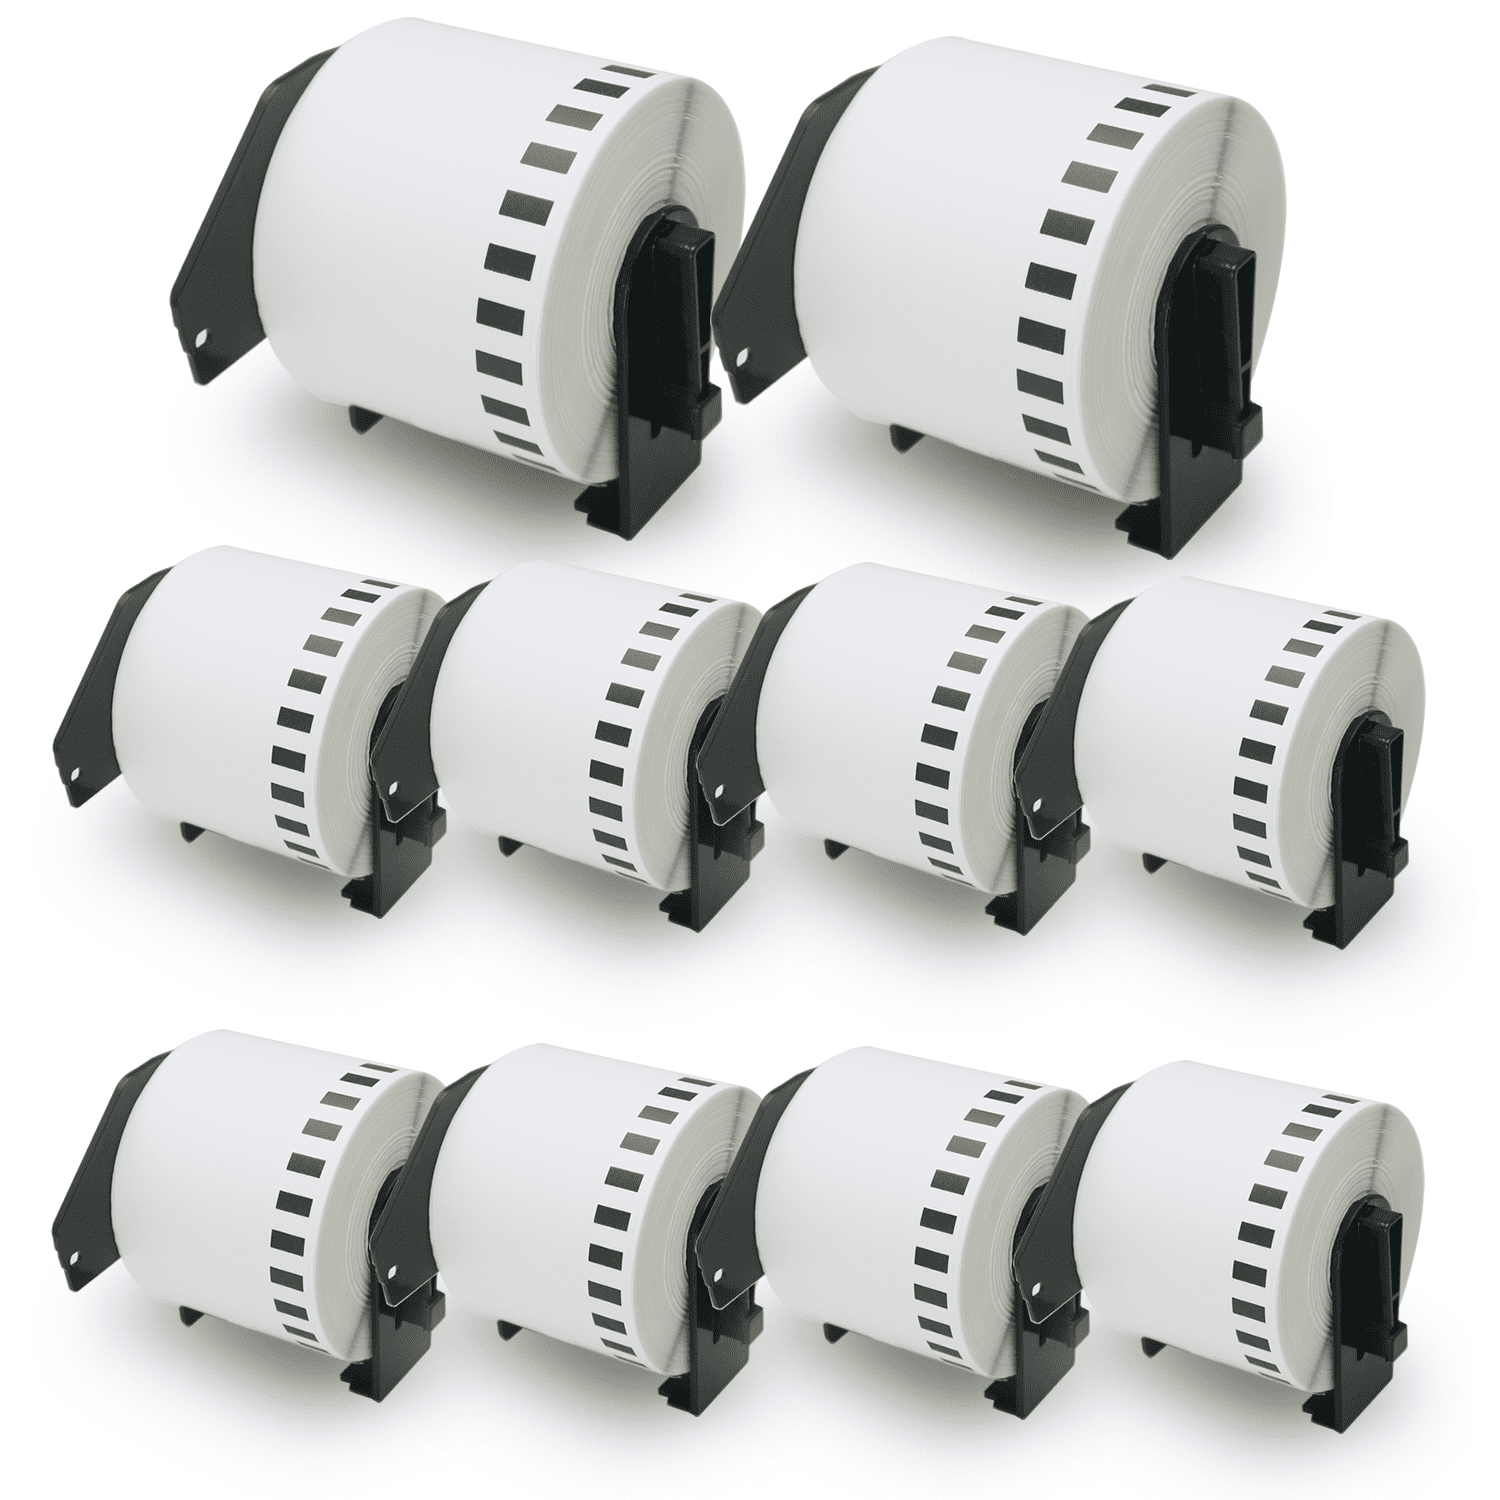 2 DK-2205 Replacement Rolls Compatible w/ Brother 